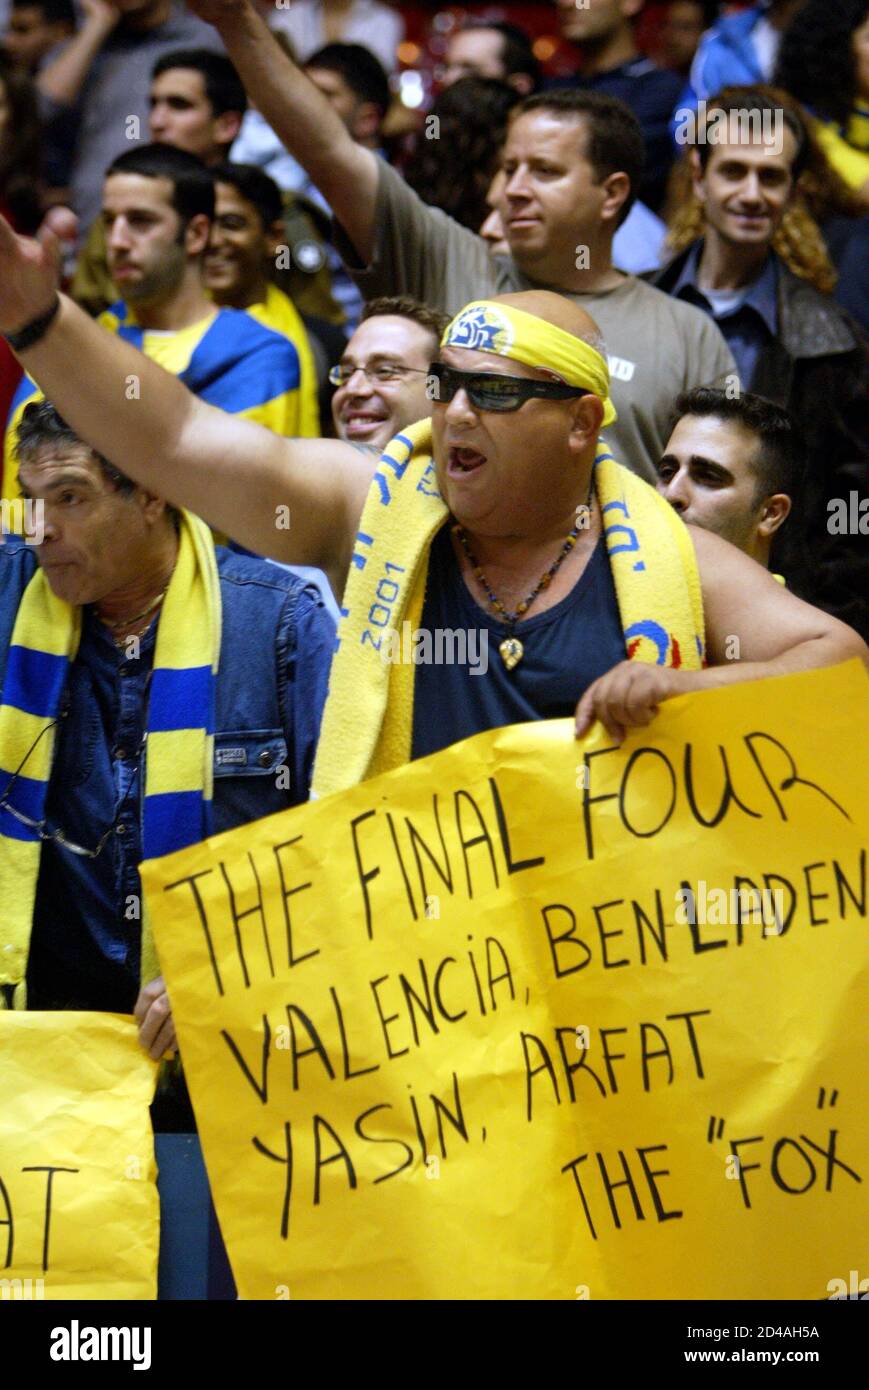 A FAN OF MACCABI TEL AVIV, THE ISRAELI BASKETBALL TEAM, HOLDS A SIGNBOARD  DURING A DRILL OF THE TEAM IN TEL AVIV. A Fan of Maccabi Tel Aviv, the  Israeli basketball team,